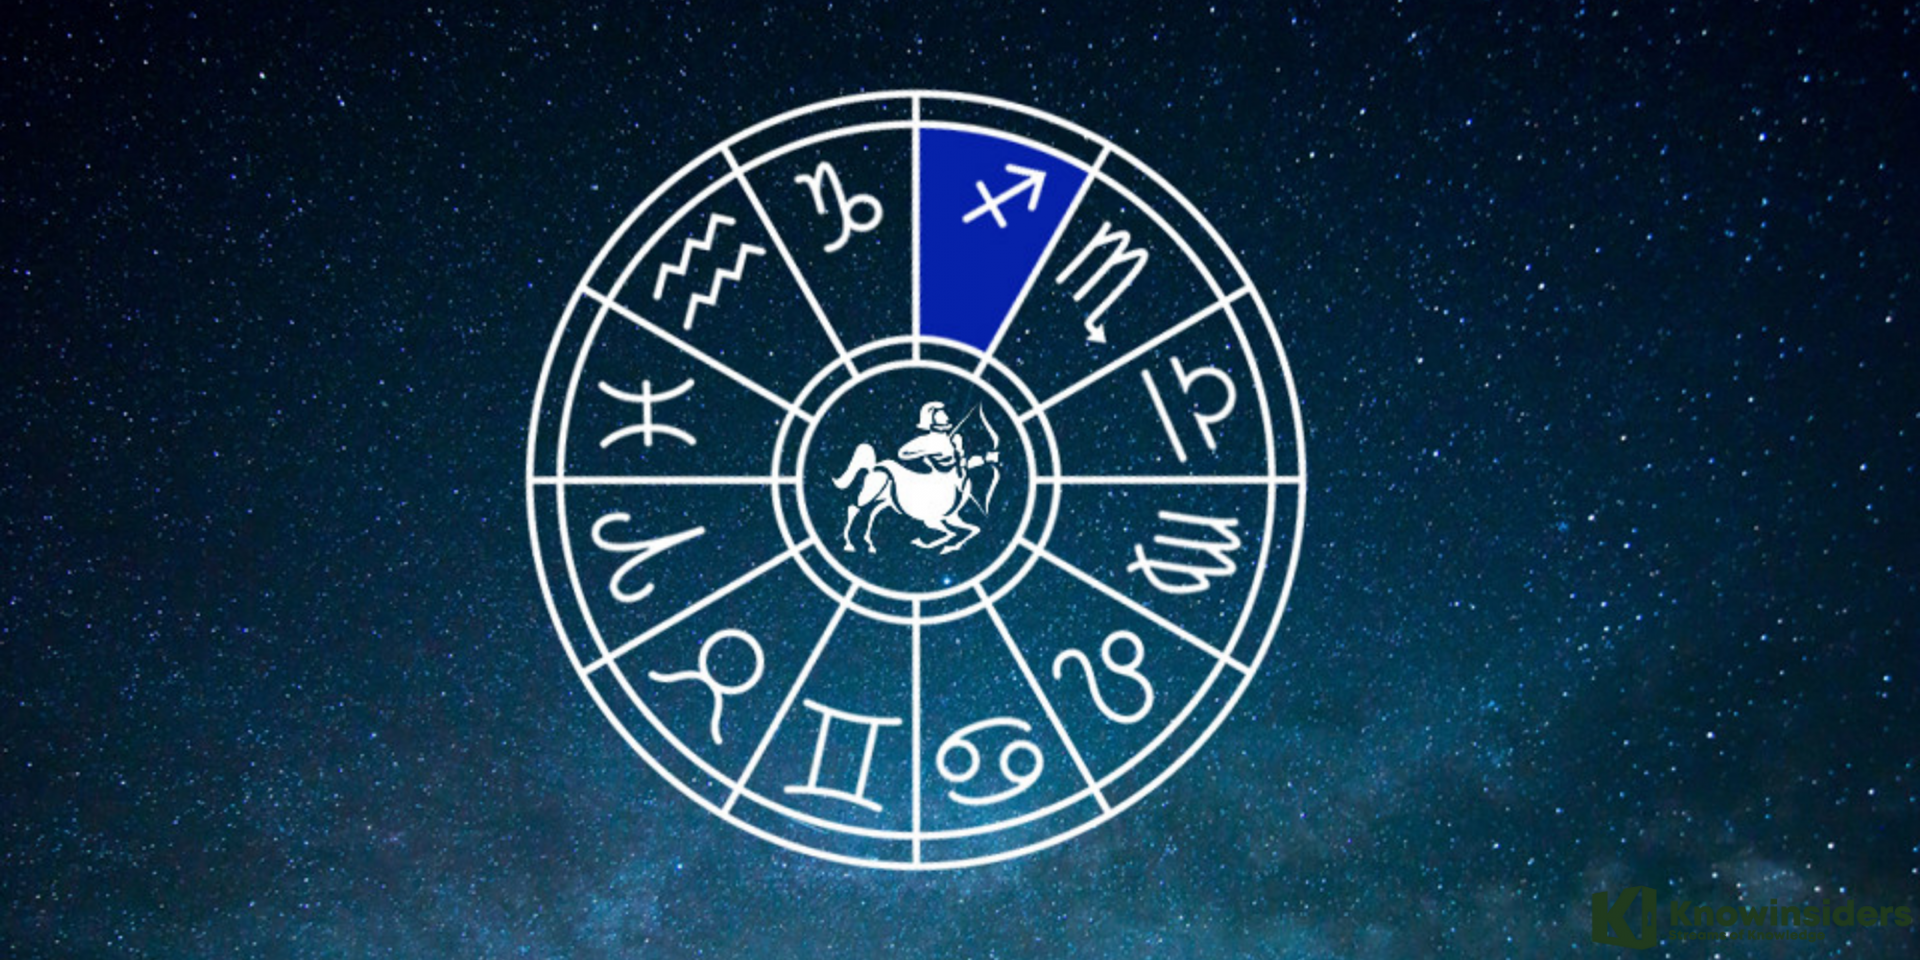 SAGITTARIUS Yearly Horoscope 2022 - Astrological Prediction for Love, Career, Money and Health